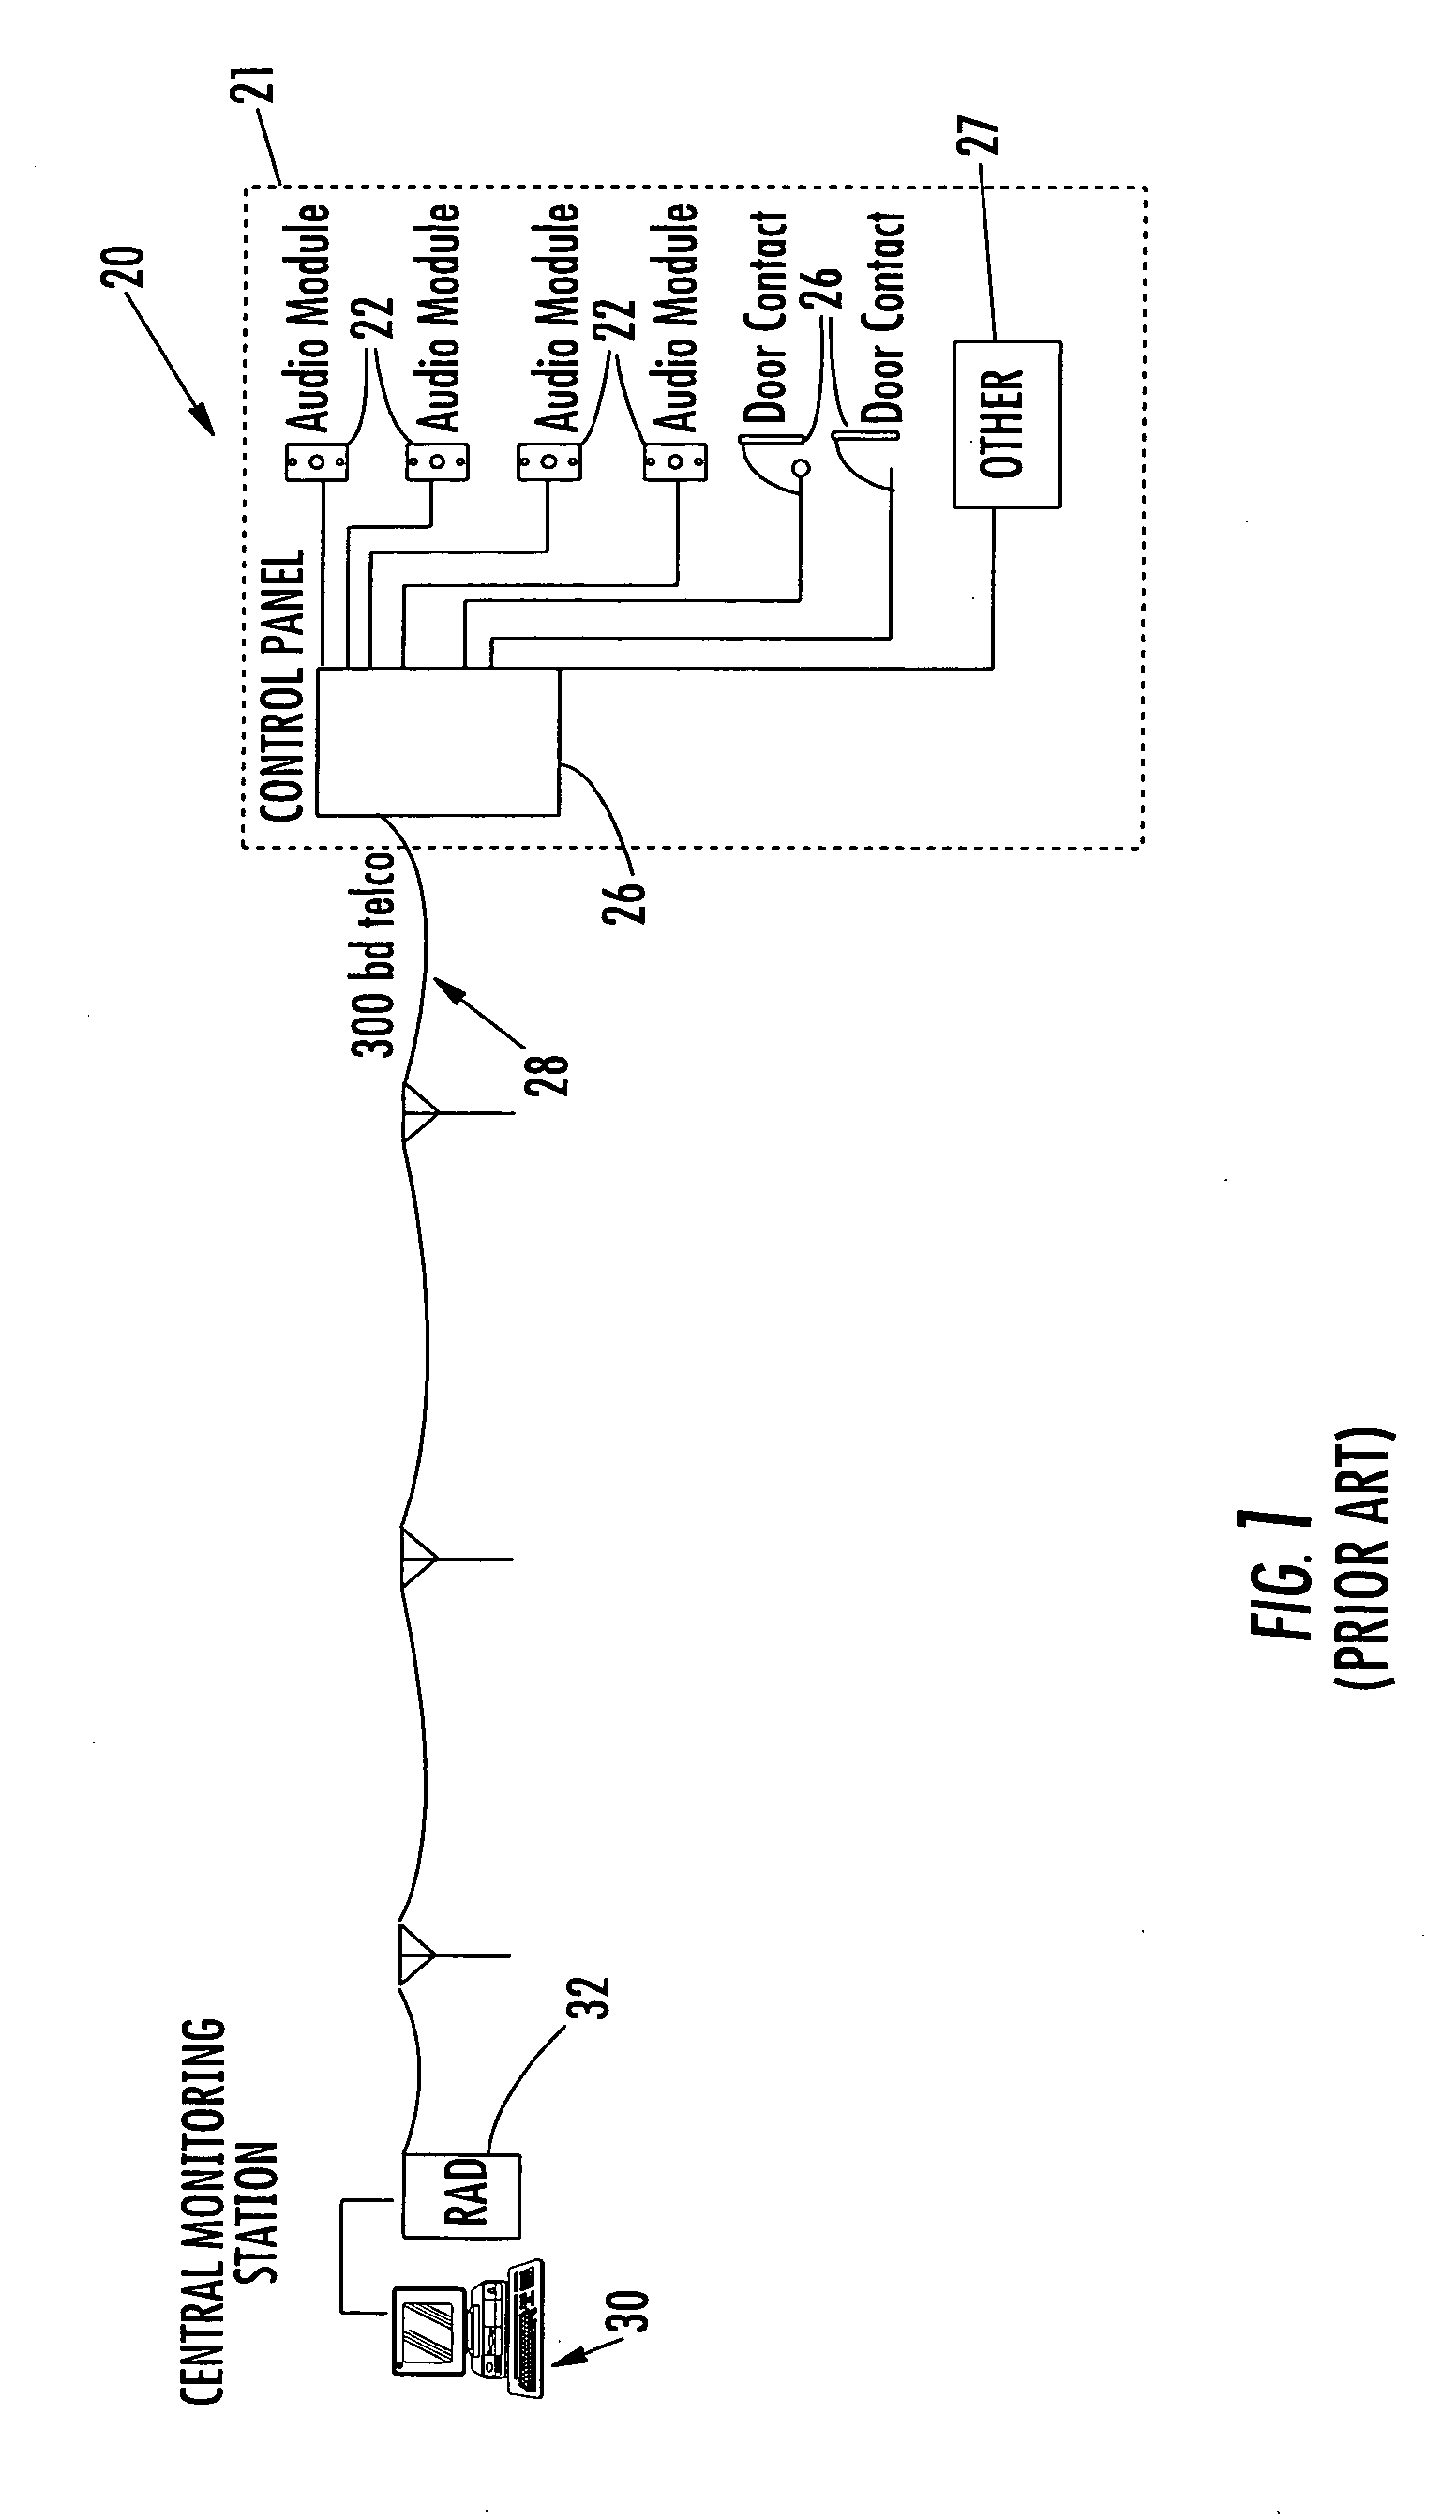 System and method for monitoring security at a premises